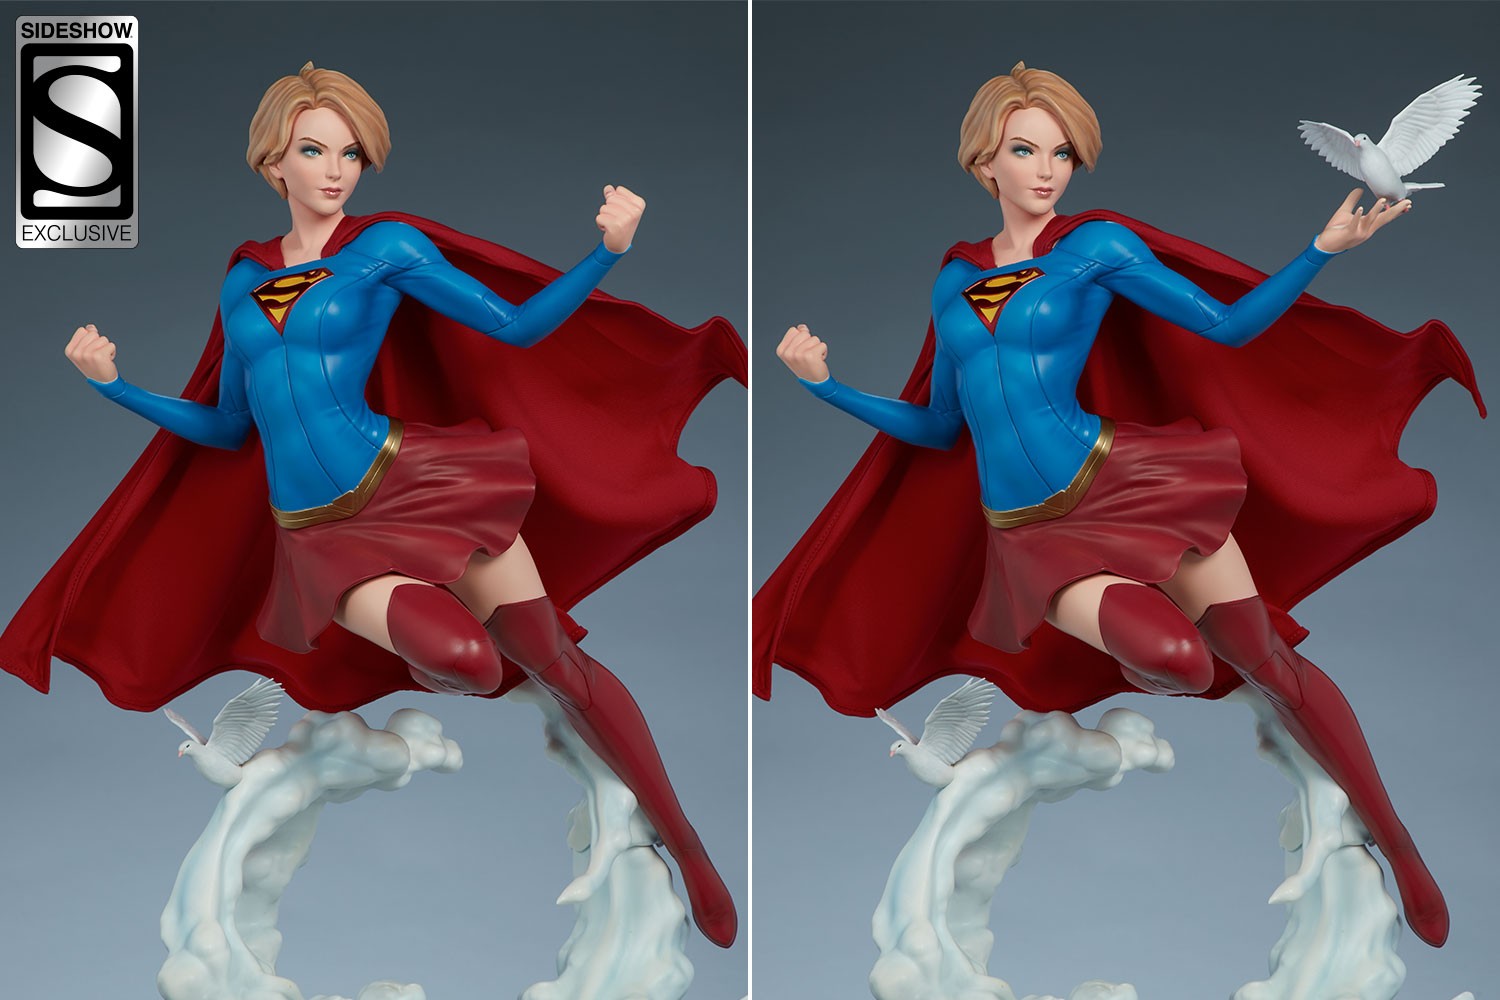 Supergirl Exclusive Edition View 3